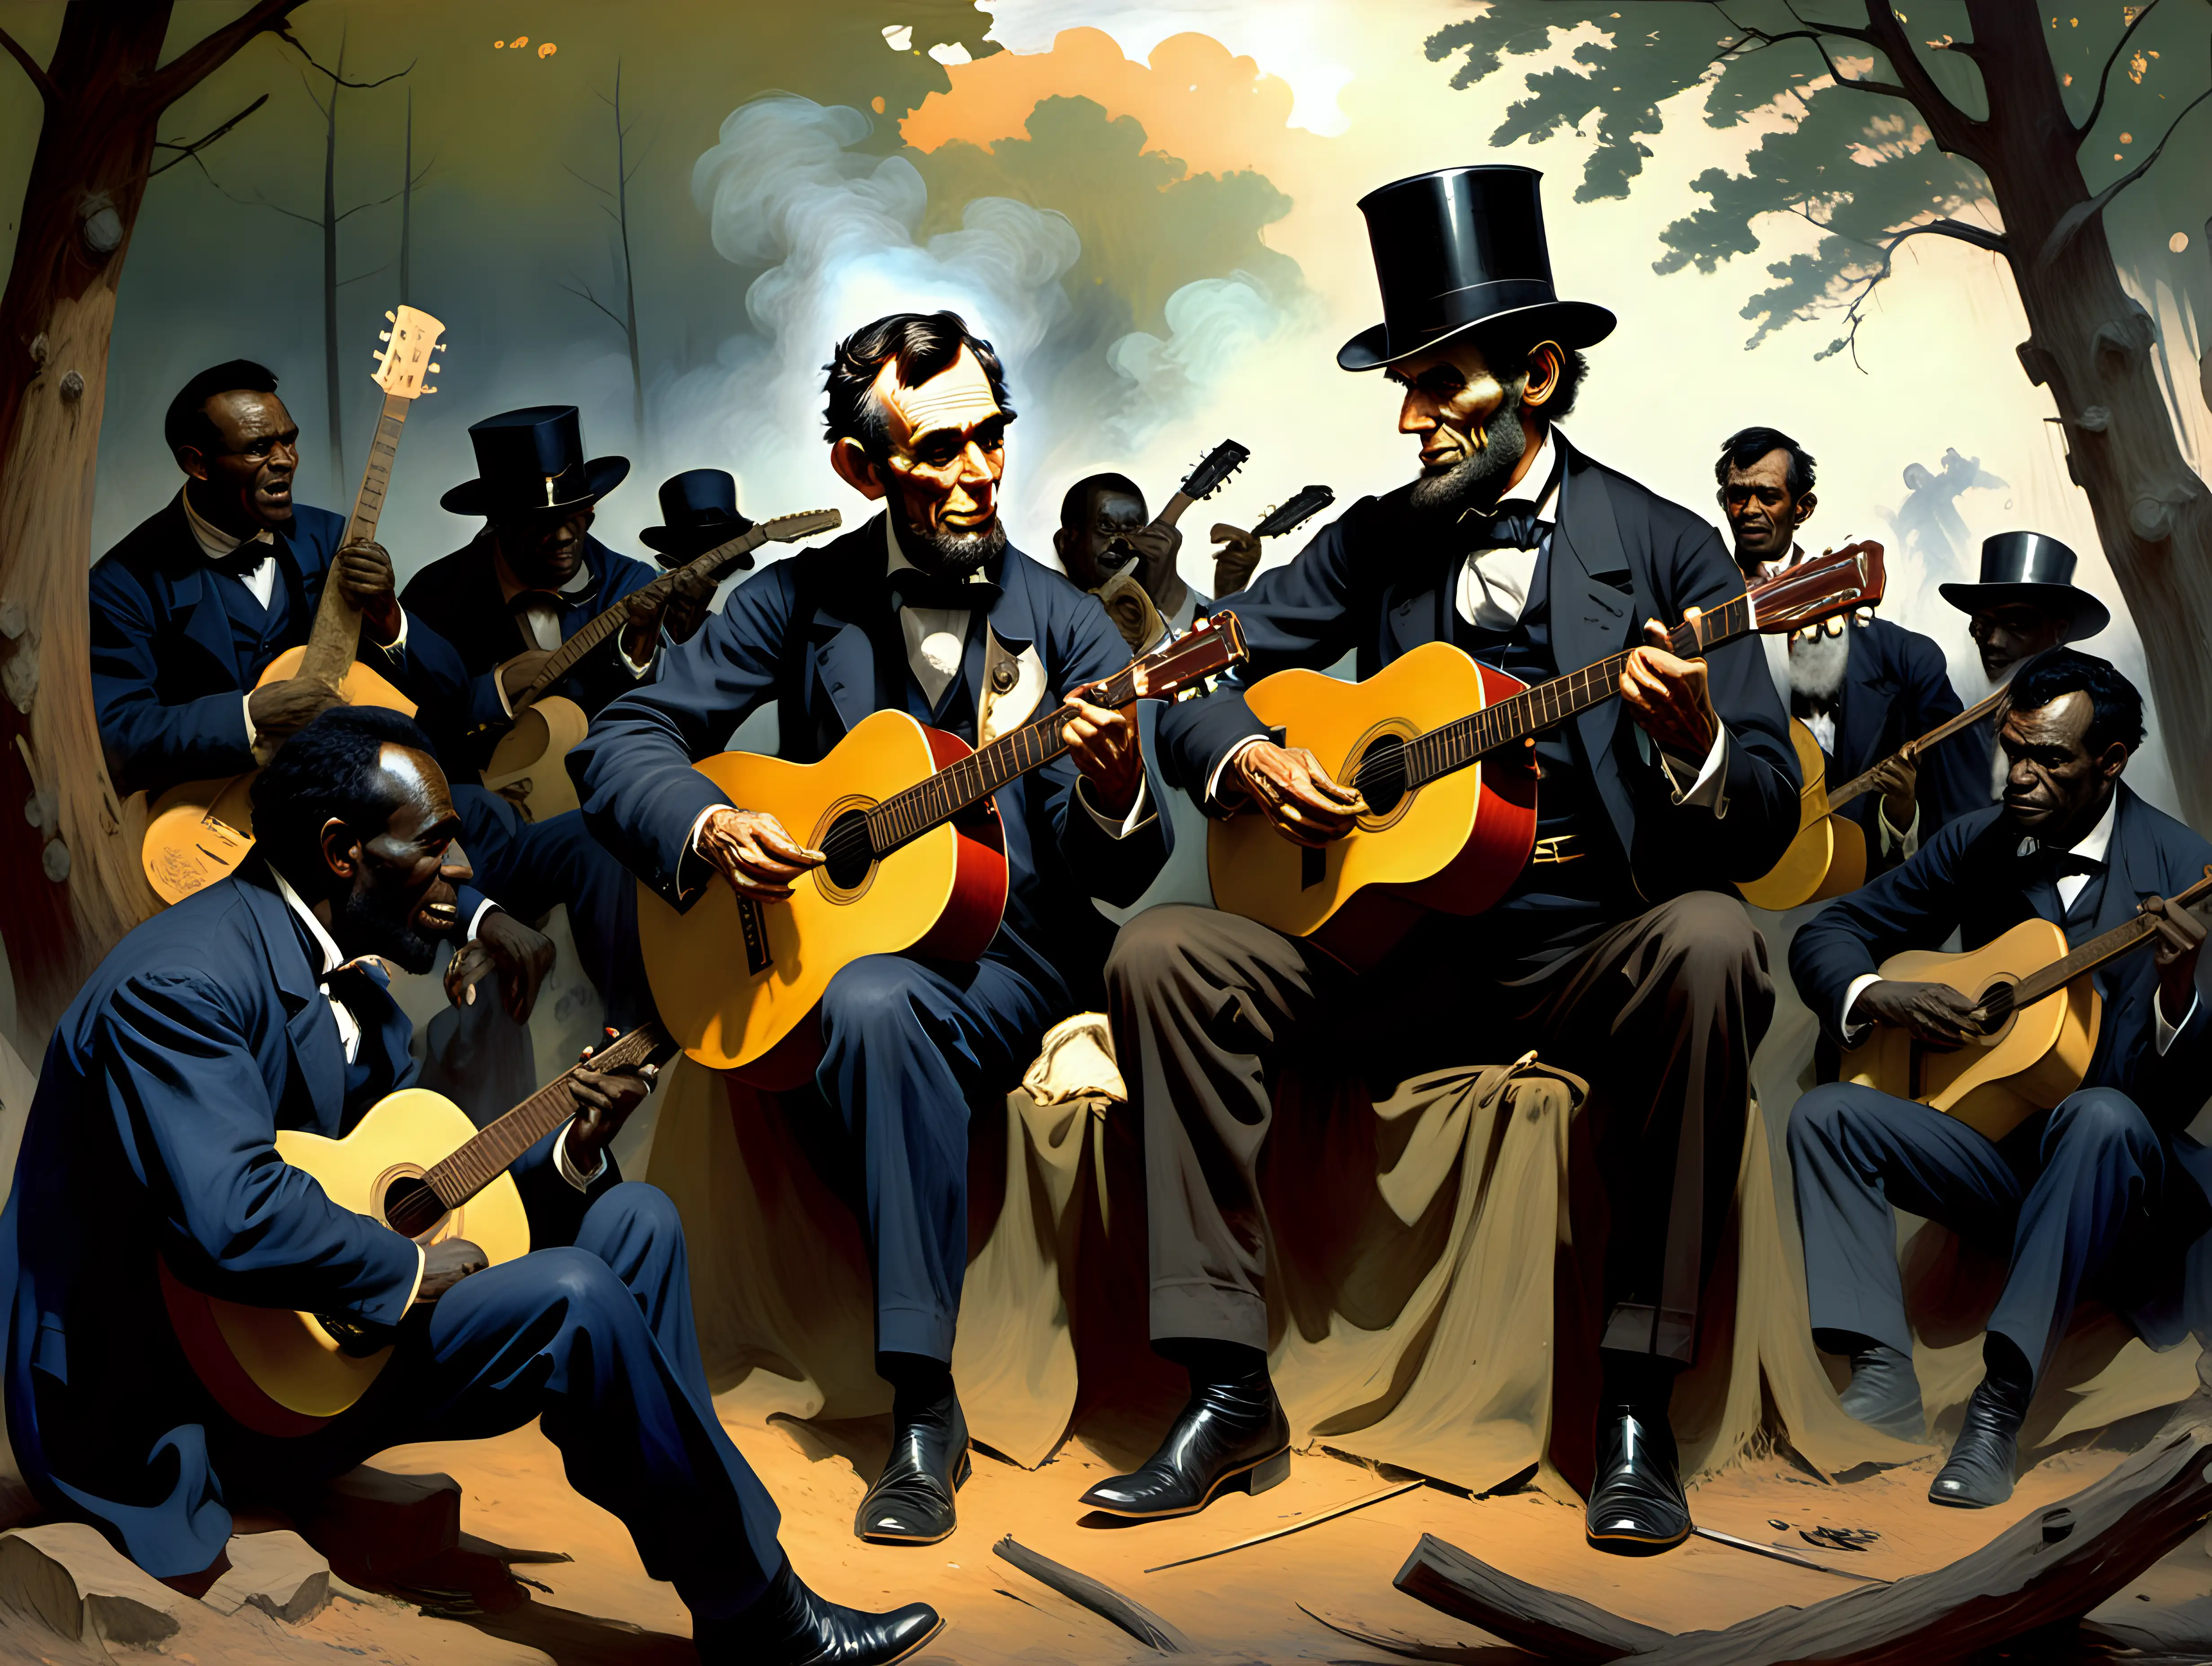 Abraham Lincoln Jamming with Blues Legends in Civil War Camp Frazetta Style